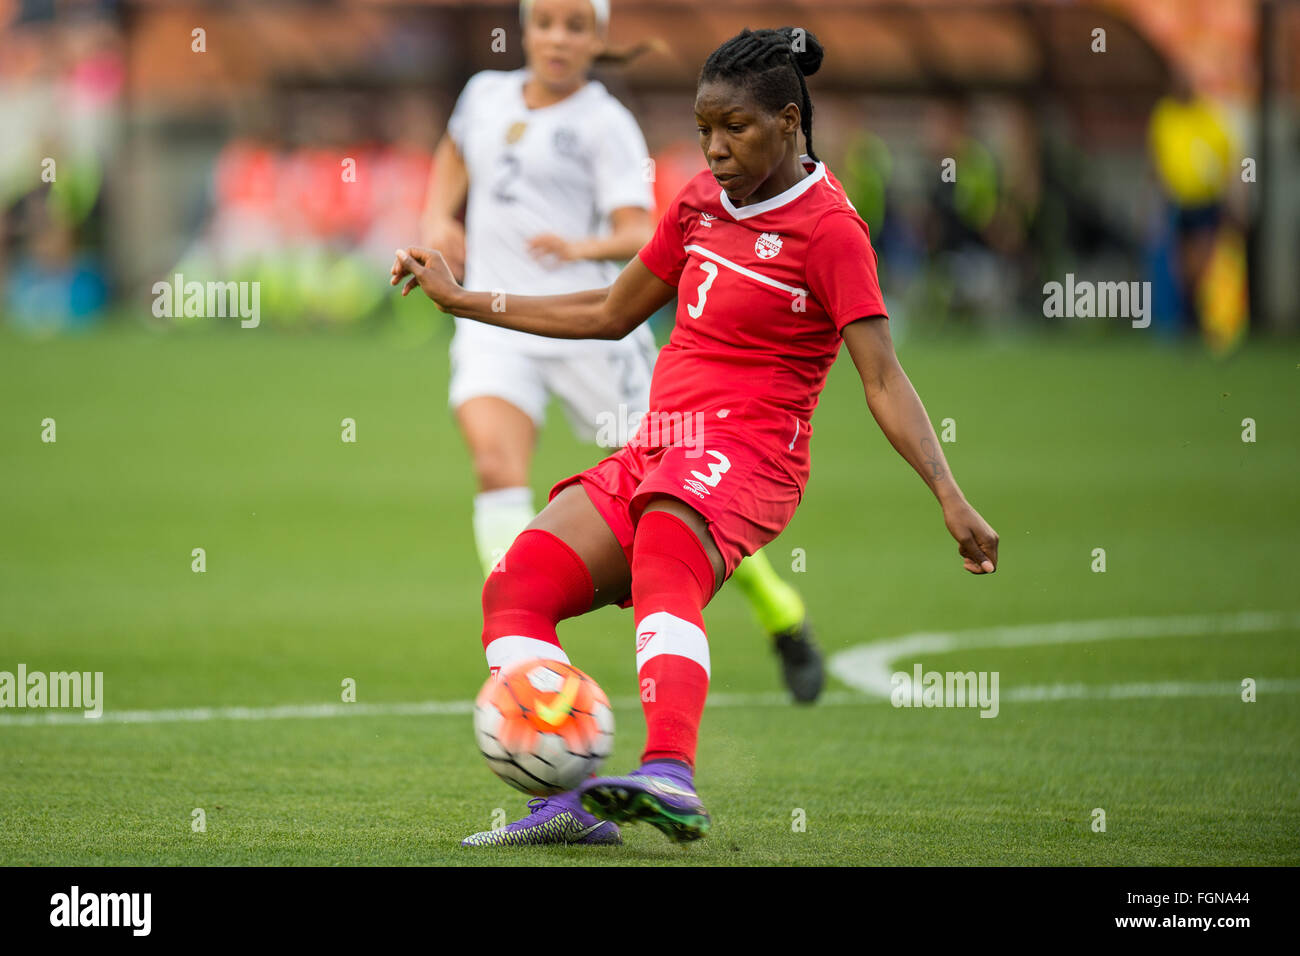 Houston, TX, USA. 21st Feb, 2016. Canada defender Kadeisha Buchanan (3) passes the ball during the Final match of the CONCACAF Olympic Qualifying tournament between Canada and the USA at BBVA Compass Stadium in Houston, TX. USA won 2-0.Trask Smith/CSM/Alamy Live News Stock Photo